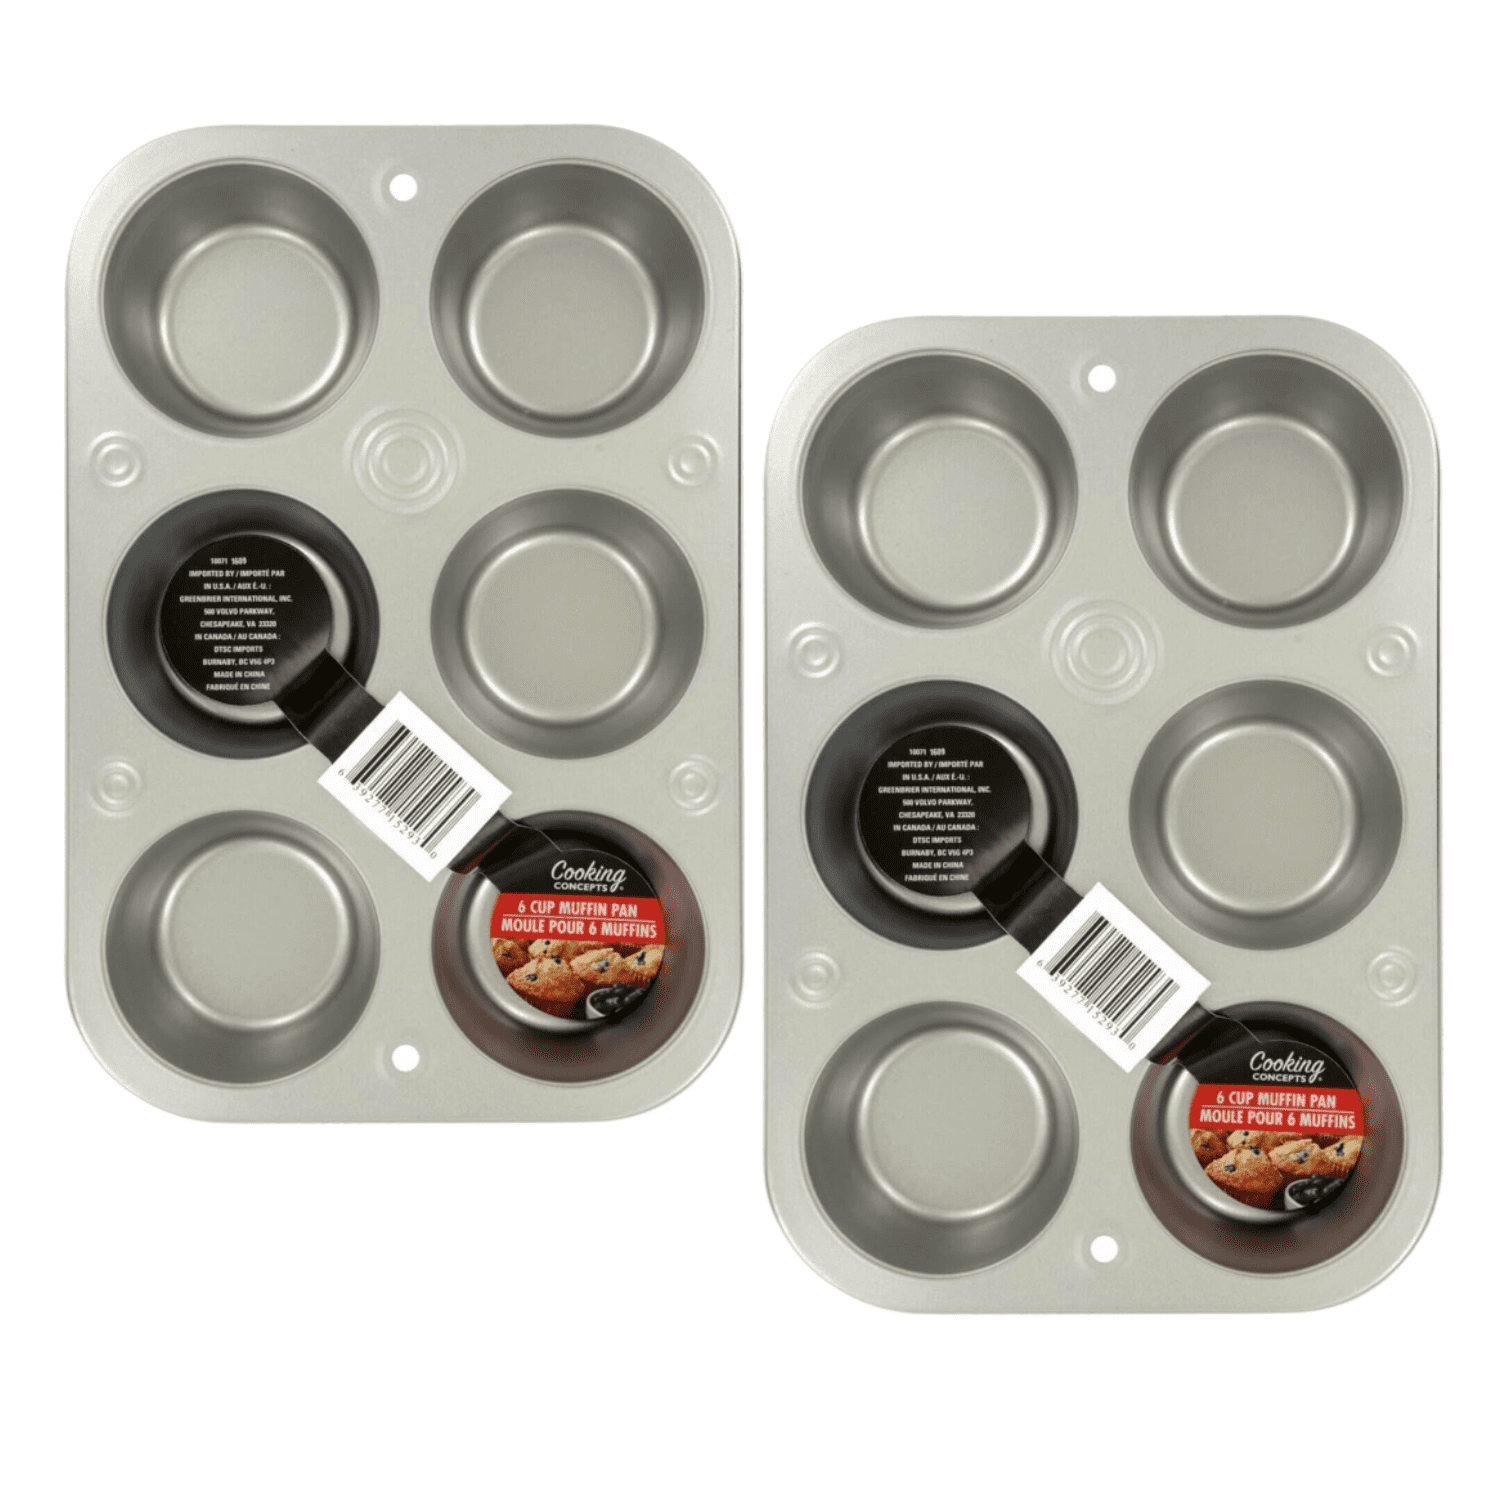 Ecolution Bakeins 6 Cup Muffin and Cupcake Pan – PFOA, BPA, and PTFE Free Non-Stick Coating – Heavy Duty Carbon Steel – Dishwasher Safe – Gray